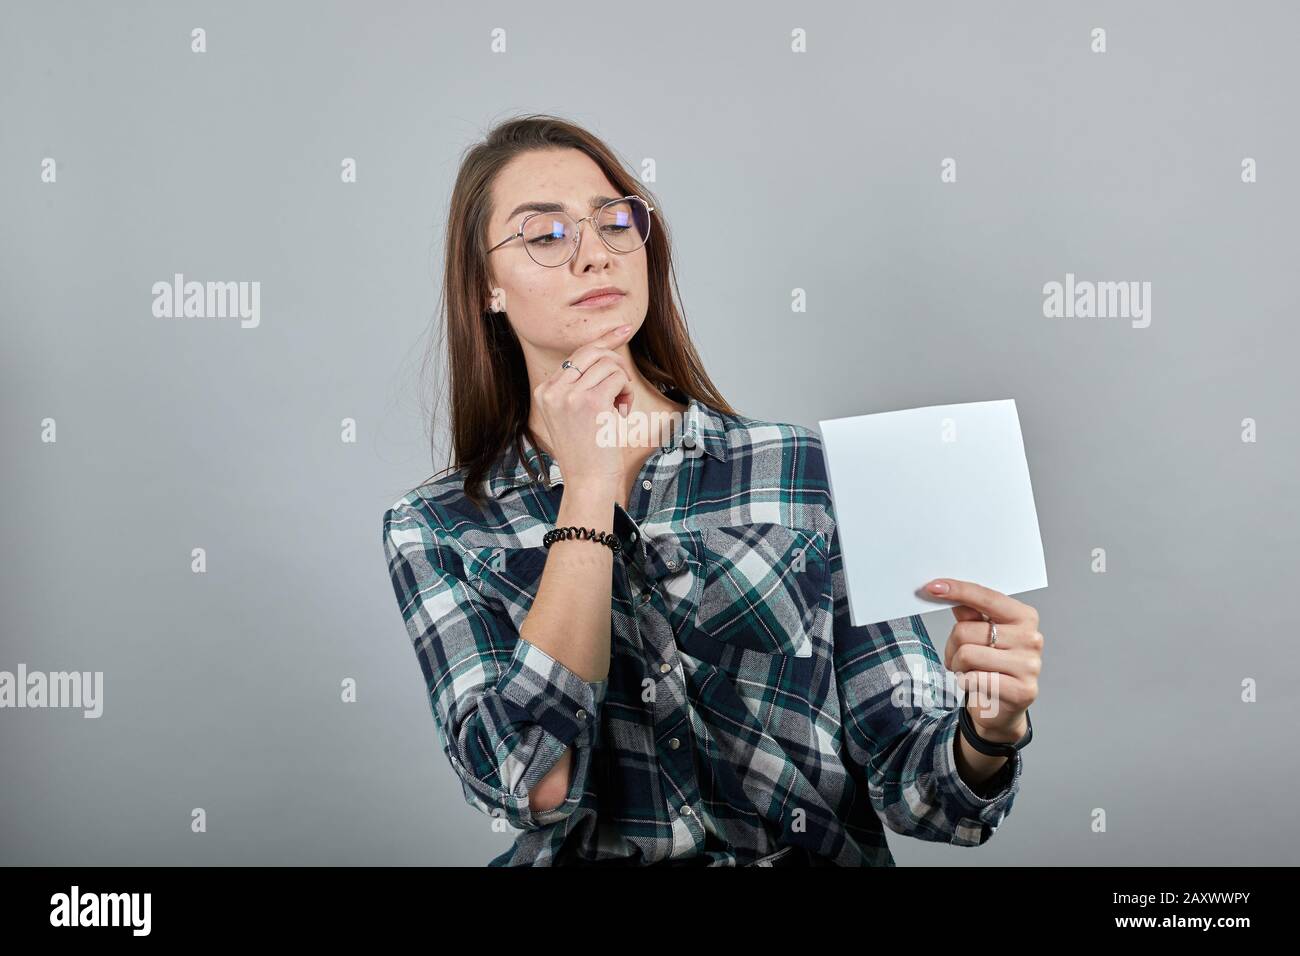 on grey background smart woman with glasses thinks, holds her chin with hand Stock Photo